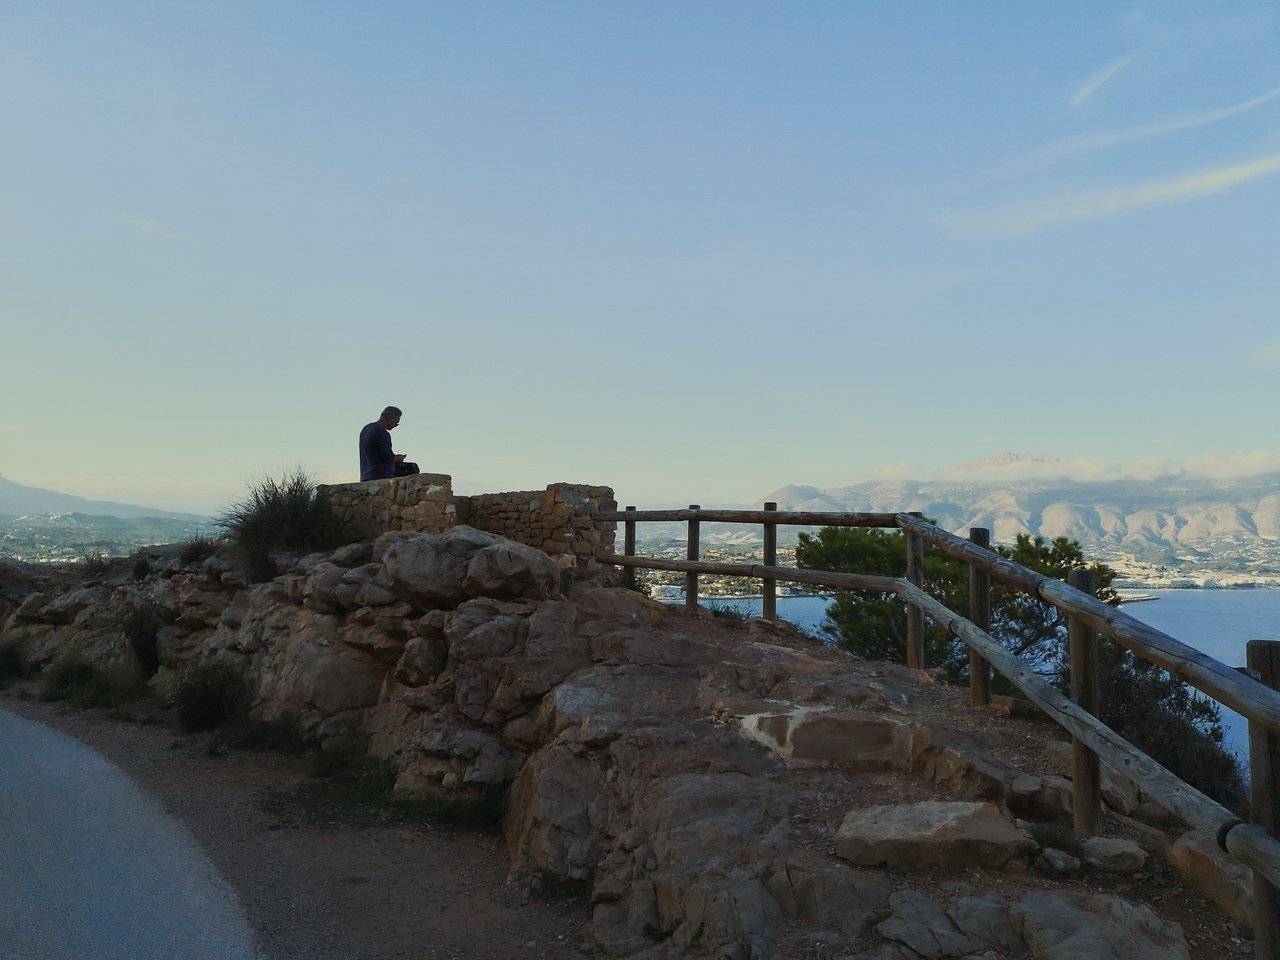   Man sitting on a rock on Camino del Faro. Photo by Alis Monte [CC BY-SA 4.0], via Connecting the Dots